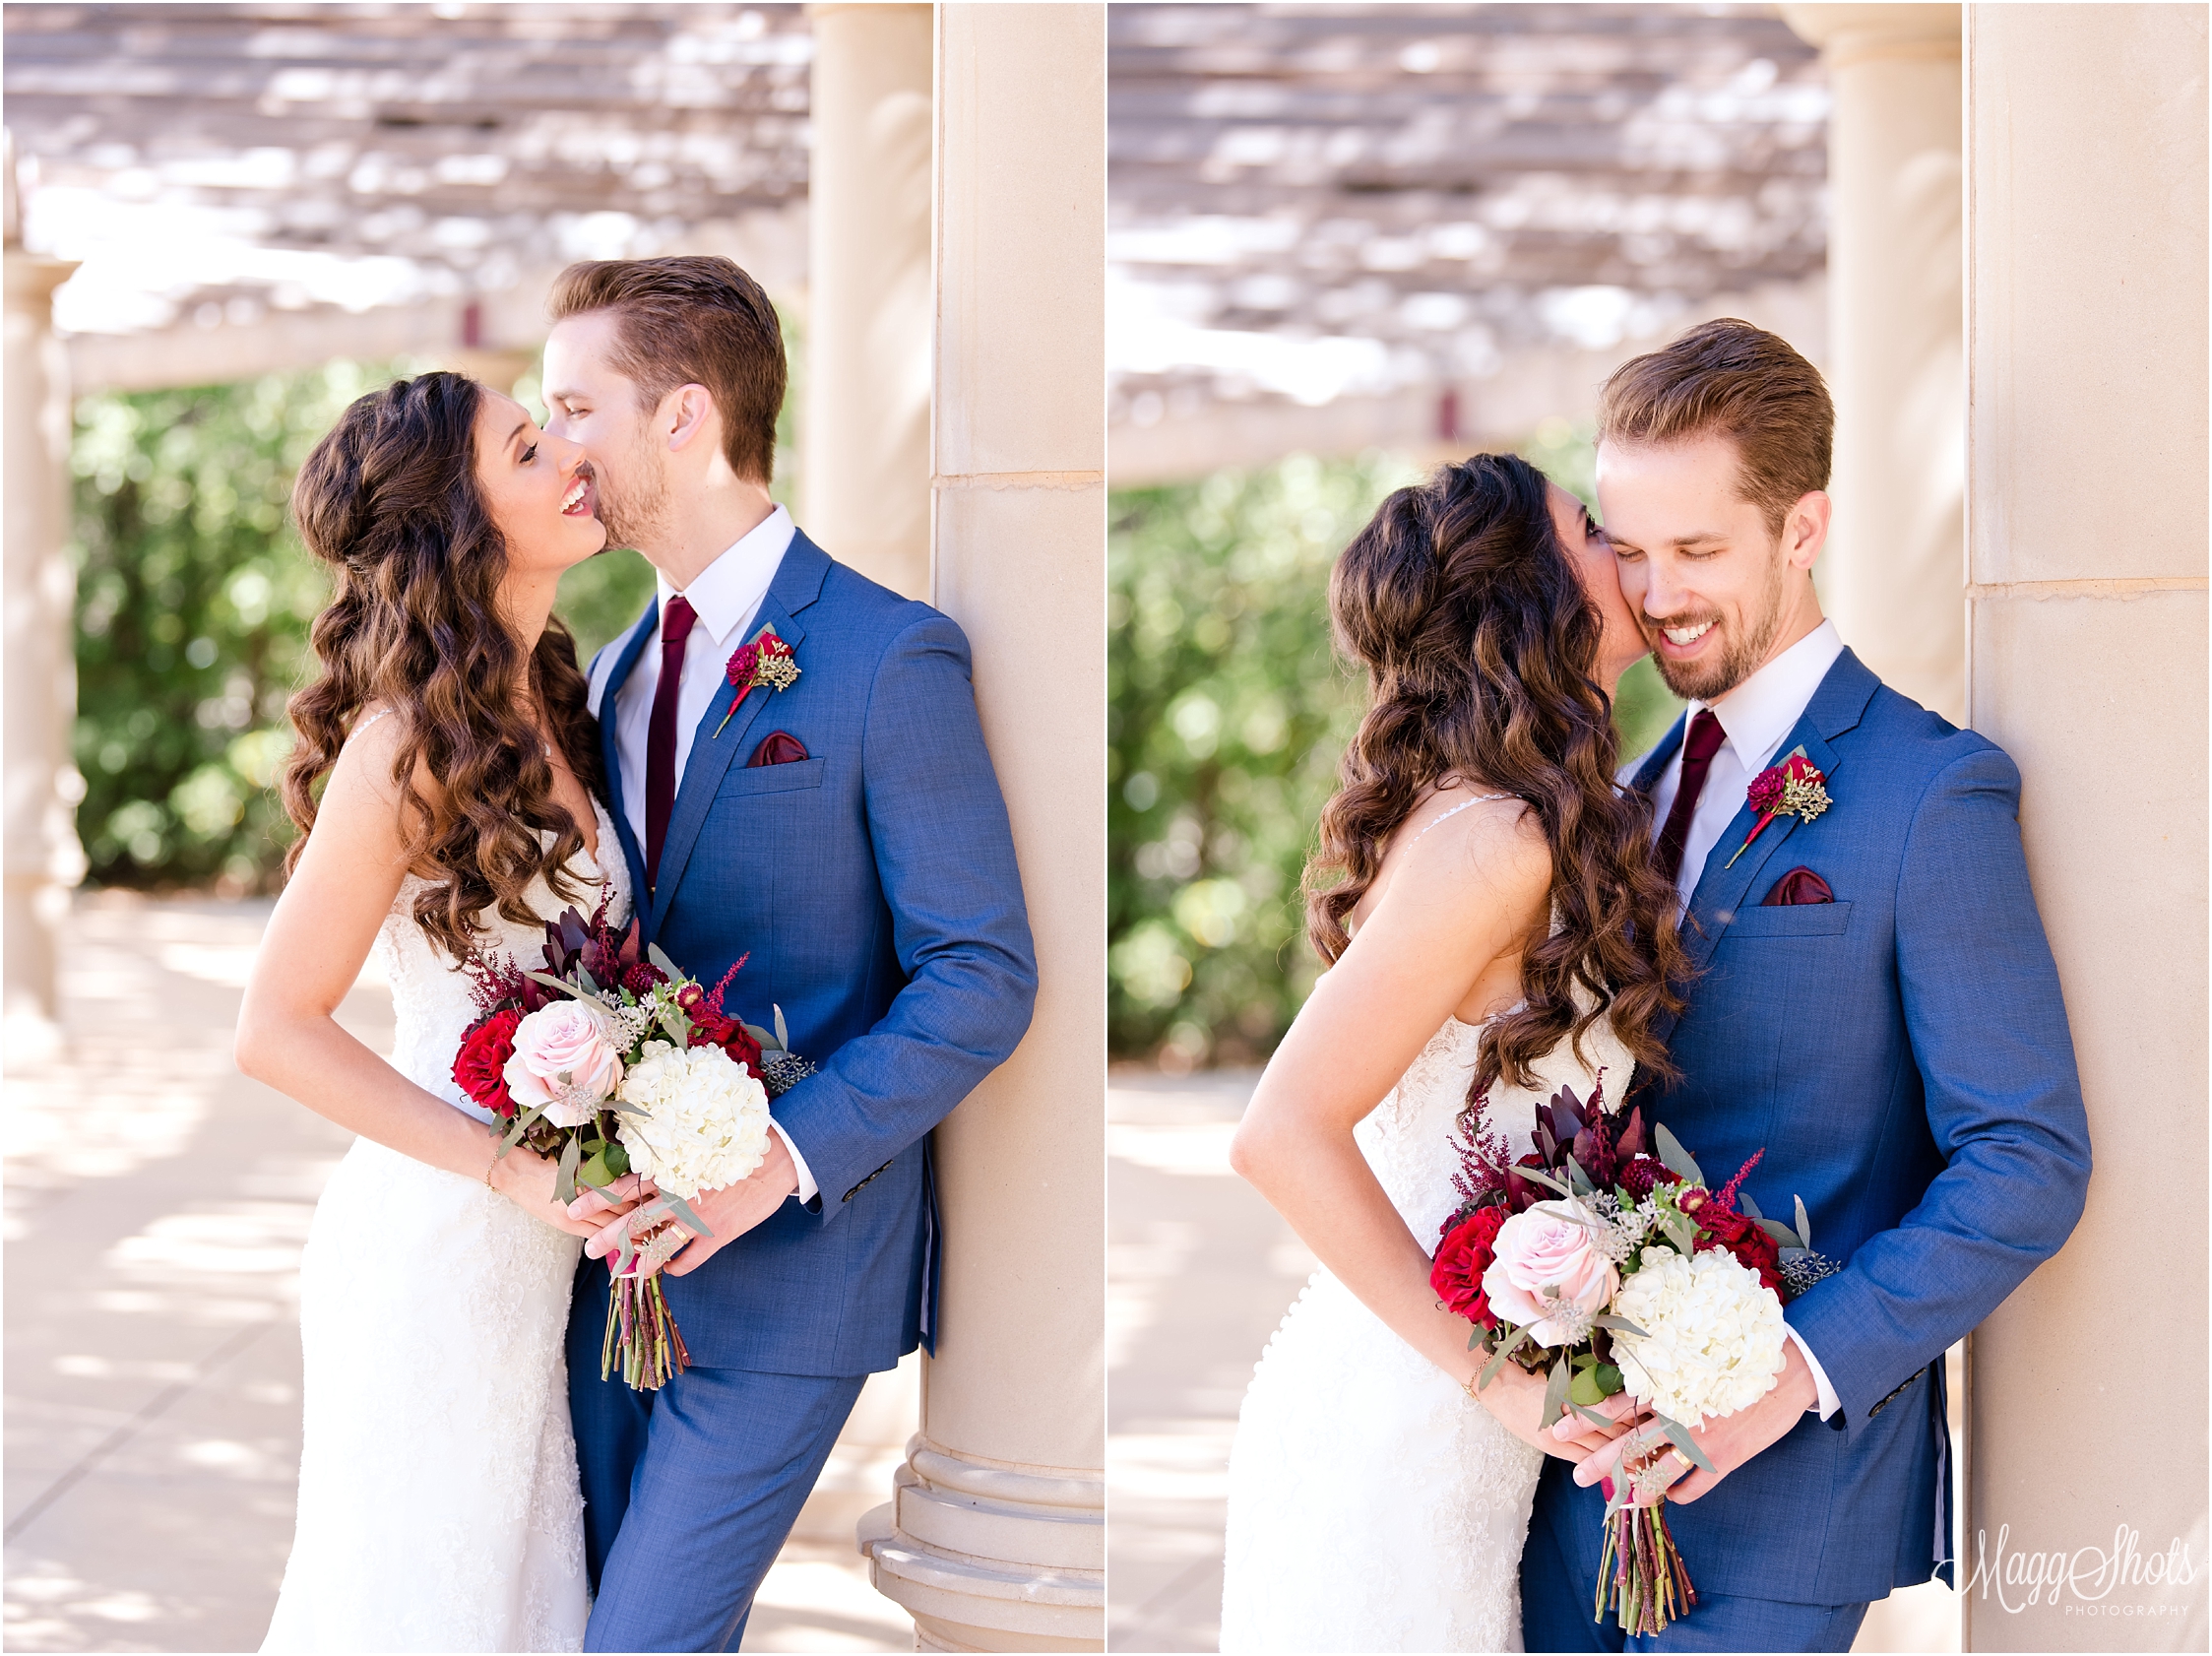 Bride and Groom, Love, Husband and Wife, Dance, Wedding, Professional Photographer, Professional Photography, Beautiful, DFW Wedding Photographer, MaggShots Photography, MaggShots